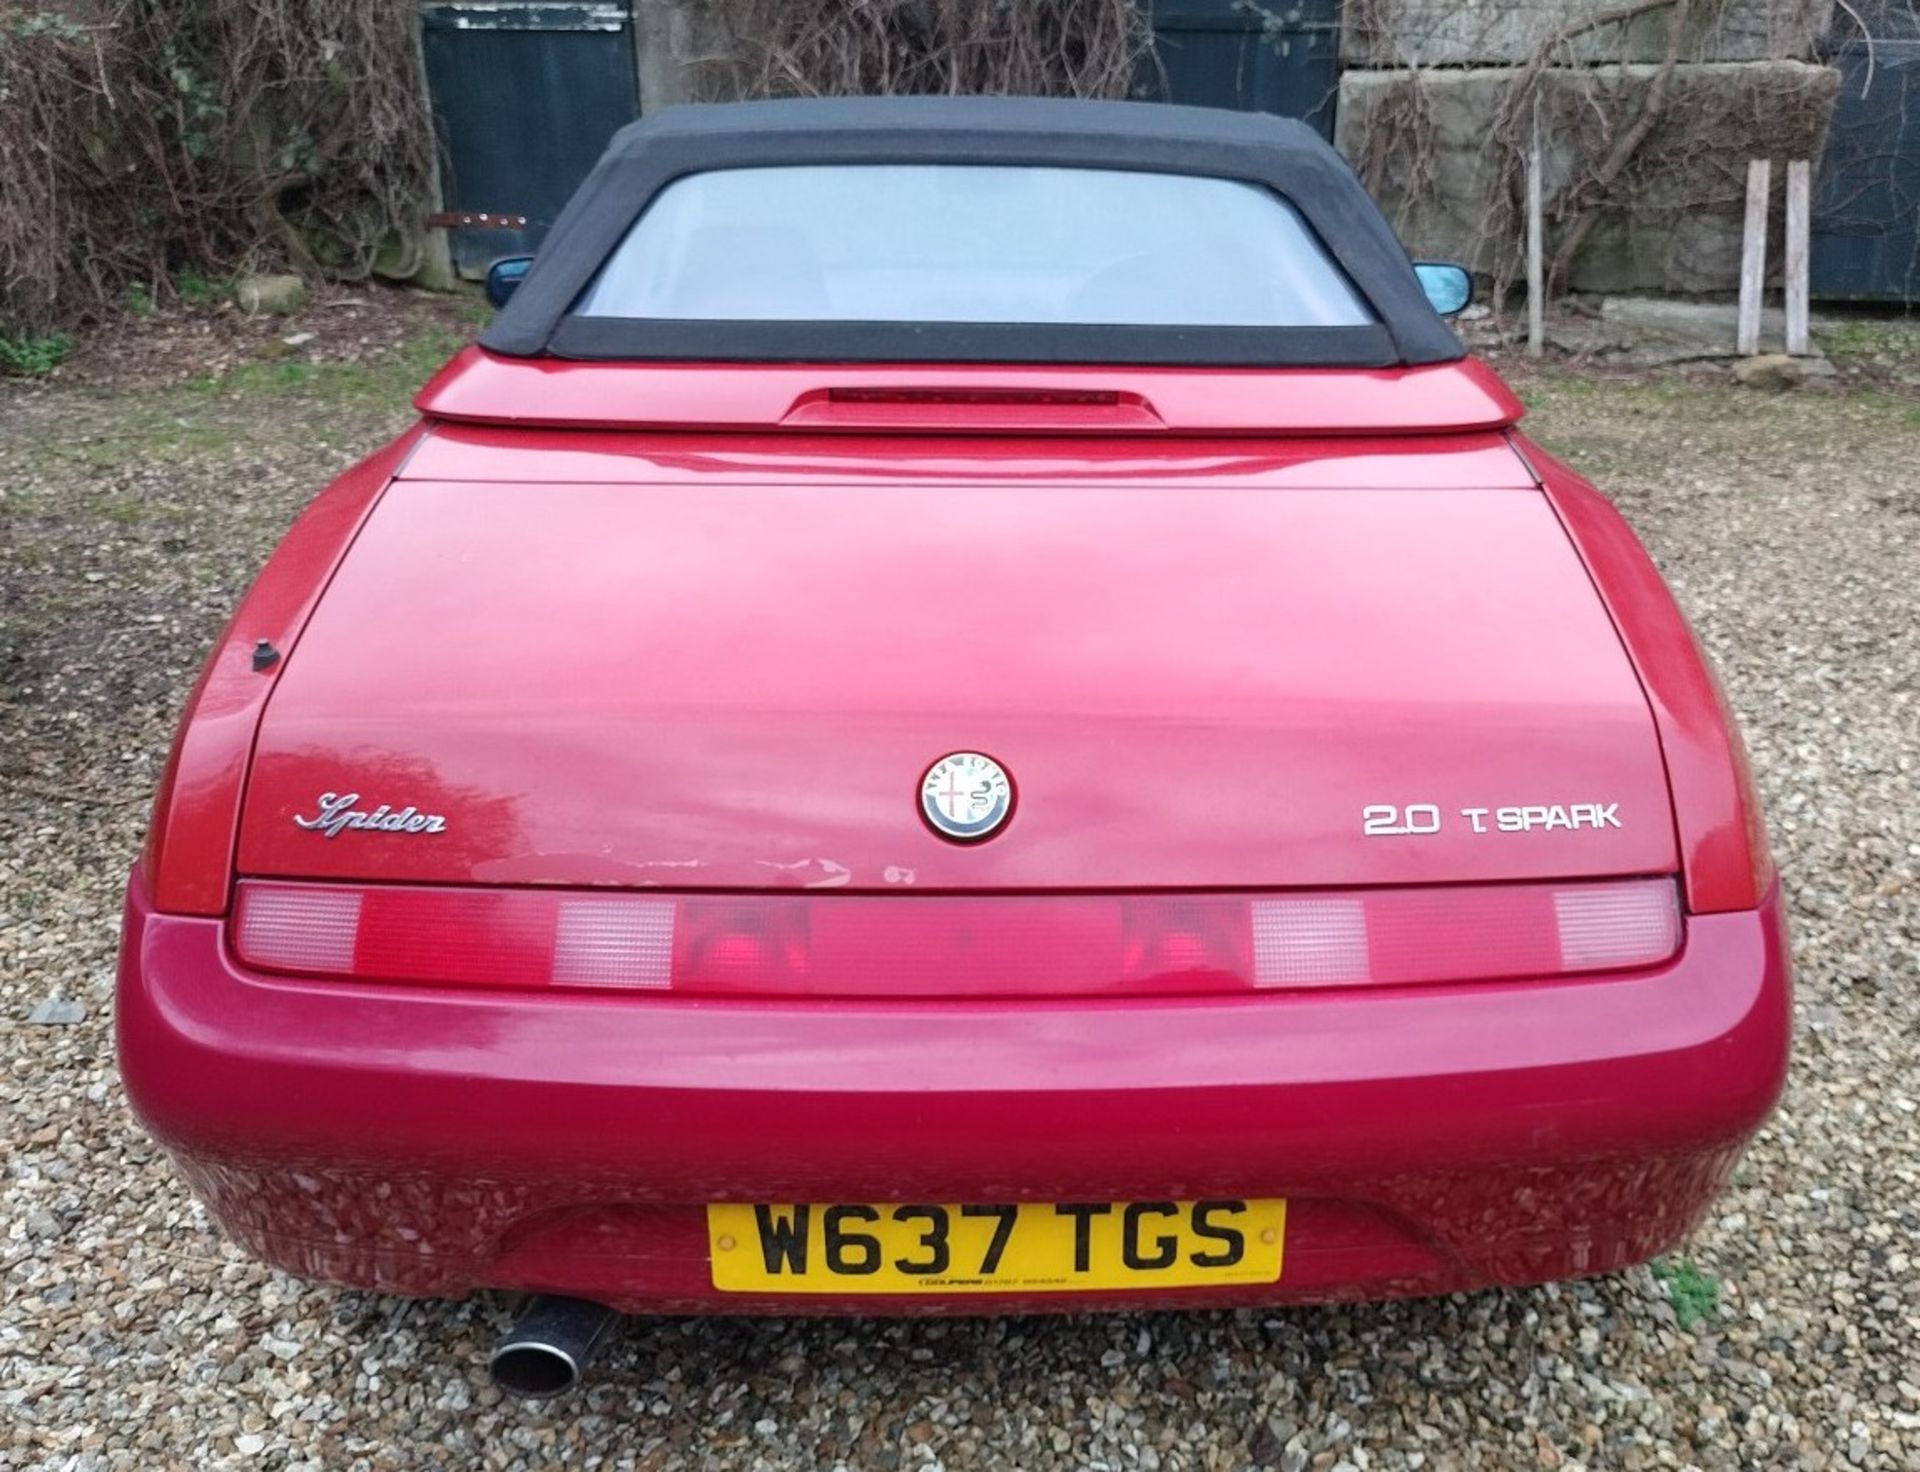 2000 Alfa Romeo Spider Lusso TS Spider Registration number W637 TGS Red with a black interior MOT - Image 14 of 14